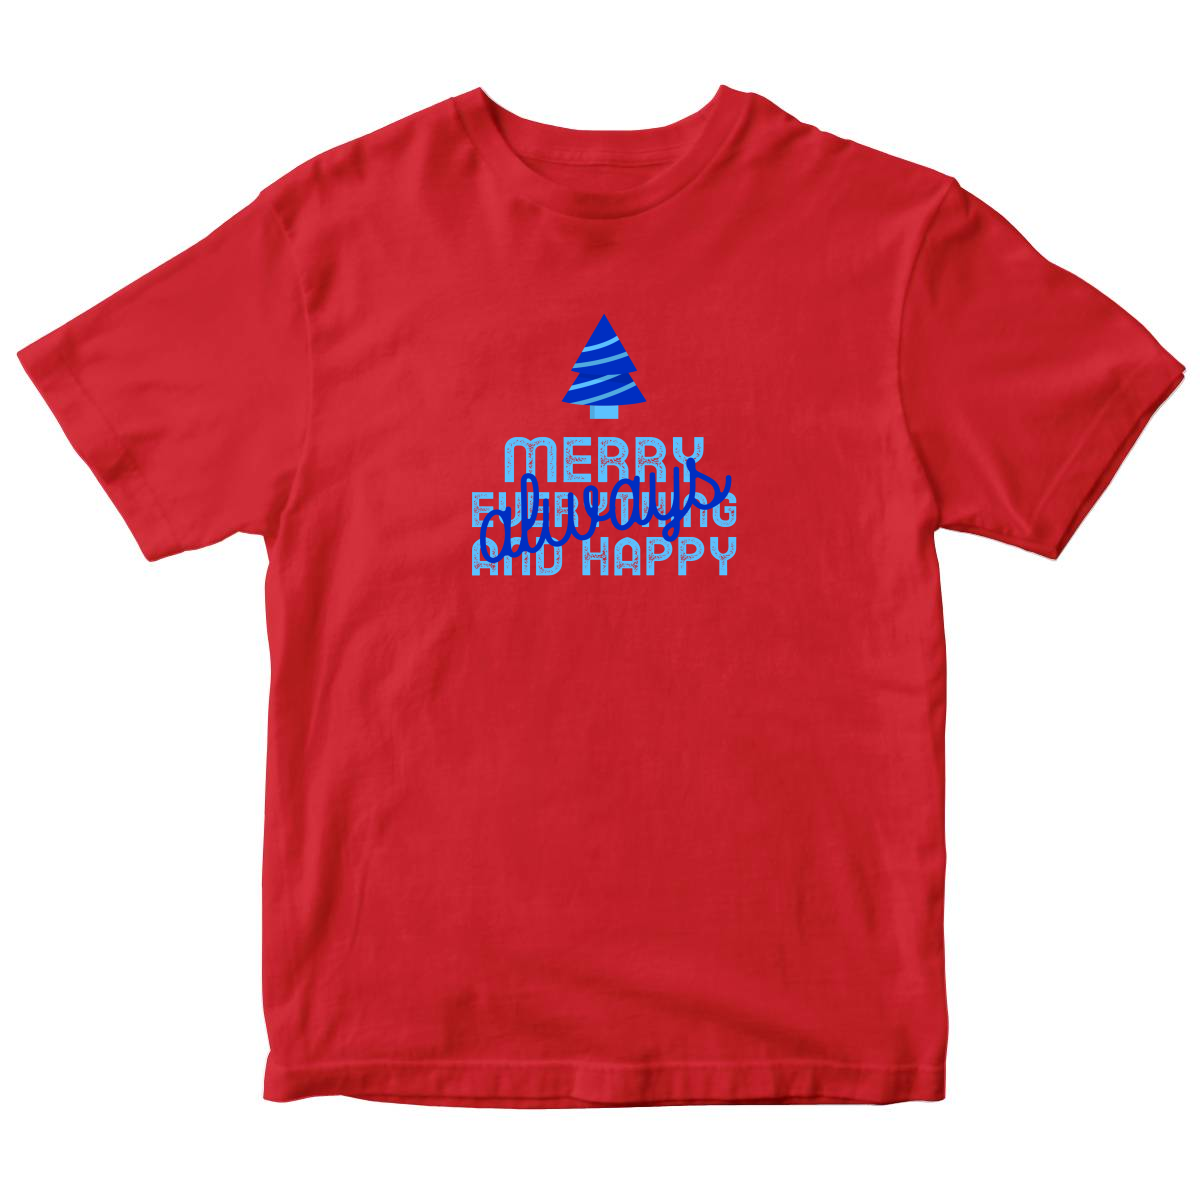 Always Merry Everything and Happy Kids T-shirt | Red